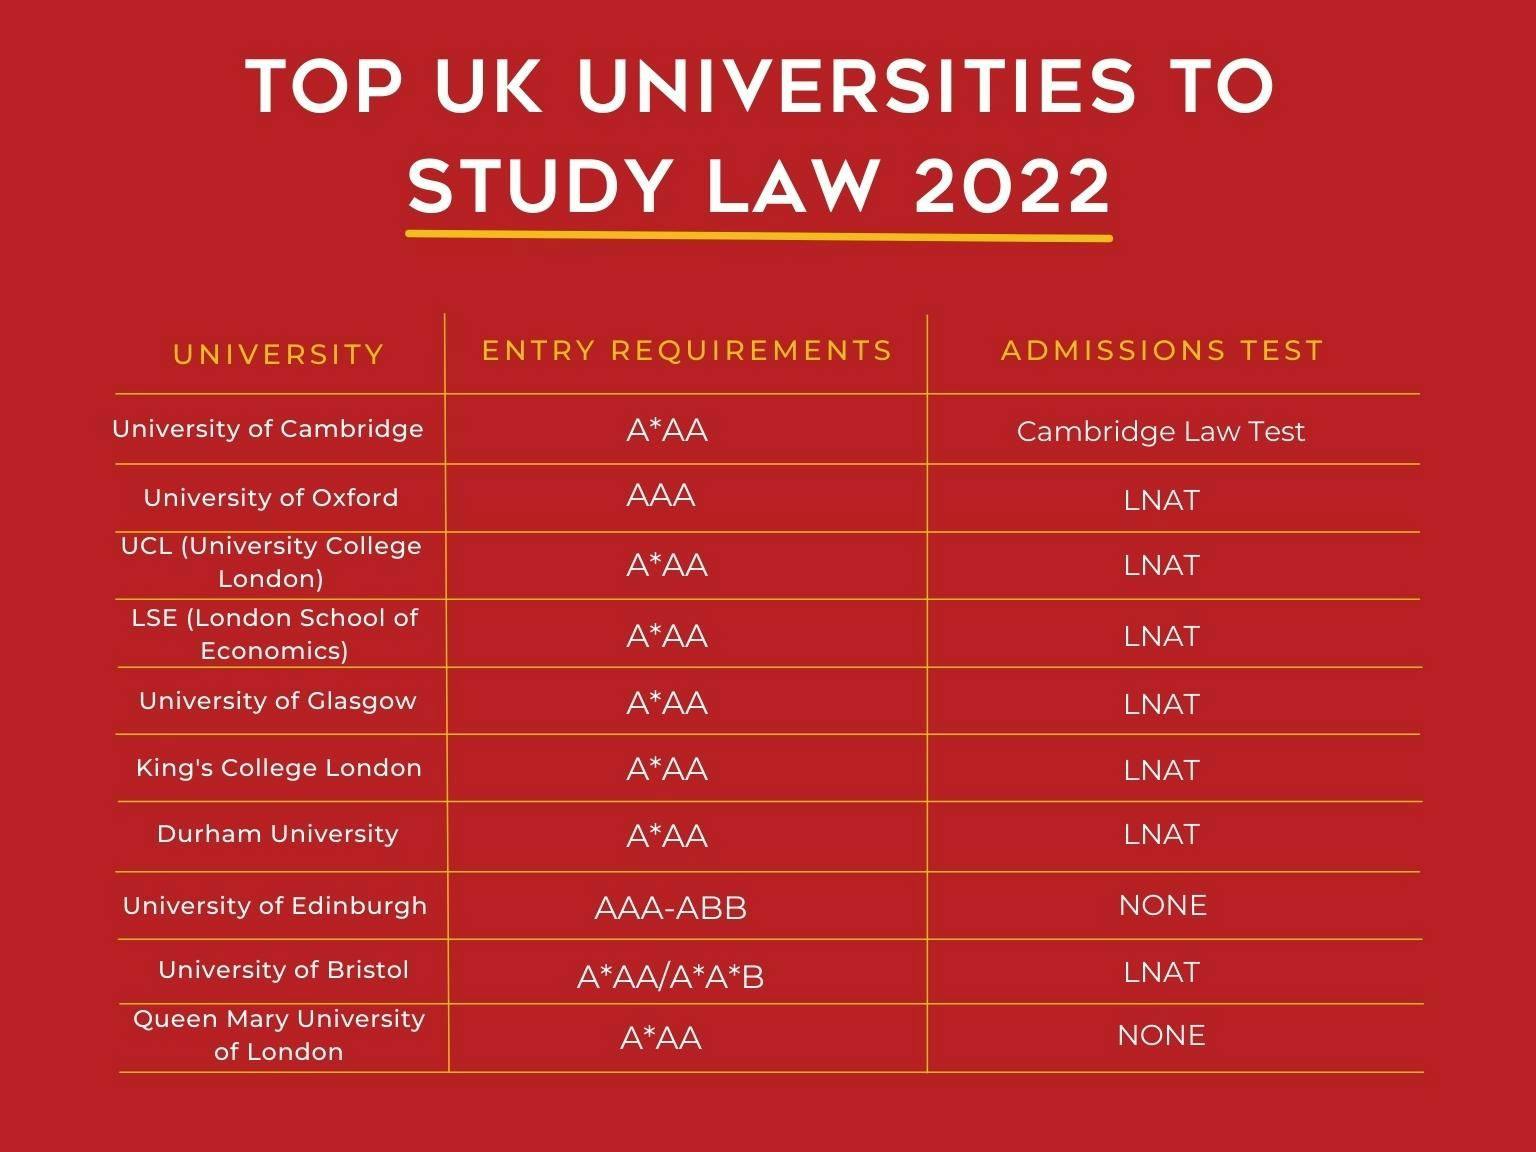 Top UK universities to study law alongside A-level requirements and entrance test needed